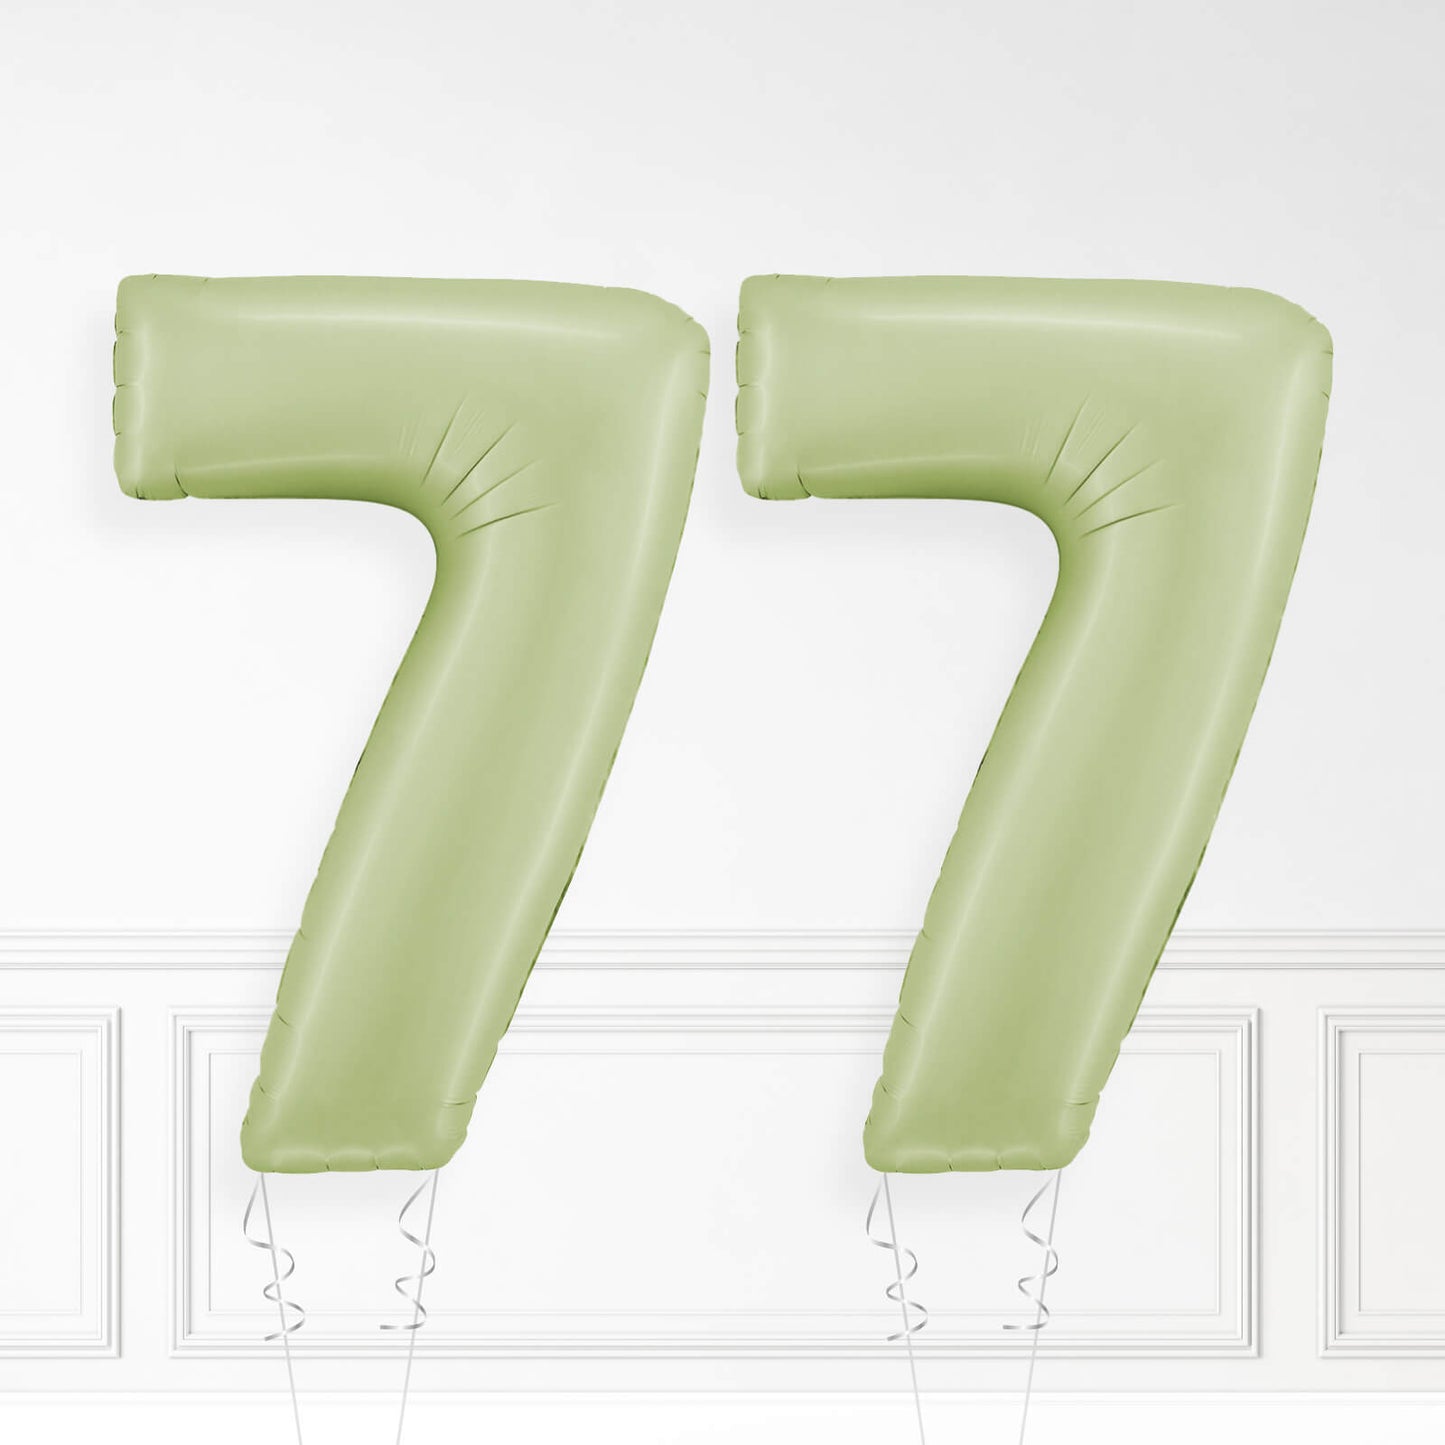 Inflated Olive Green Foil Number Balloon